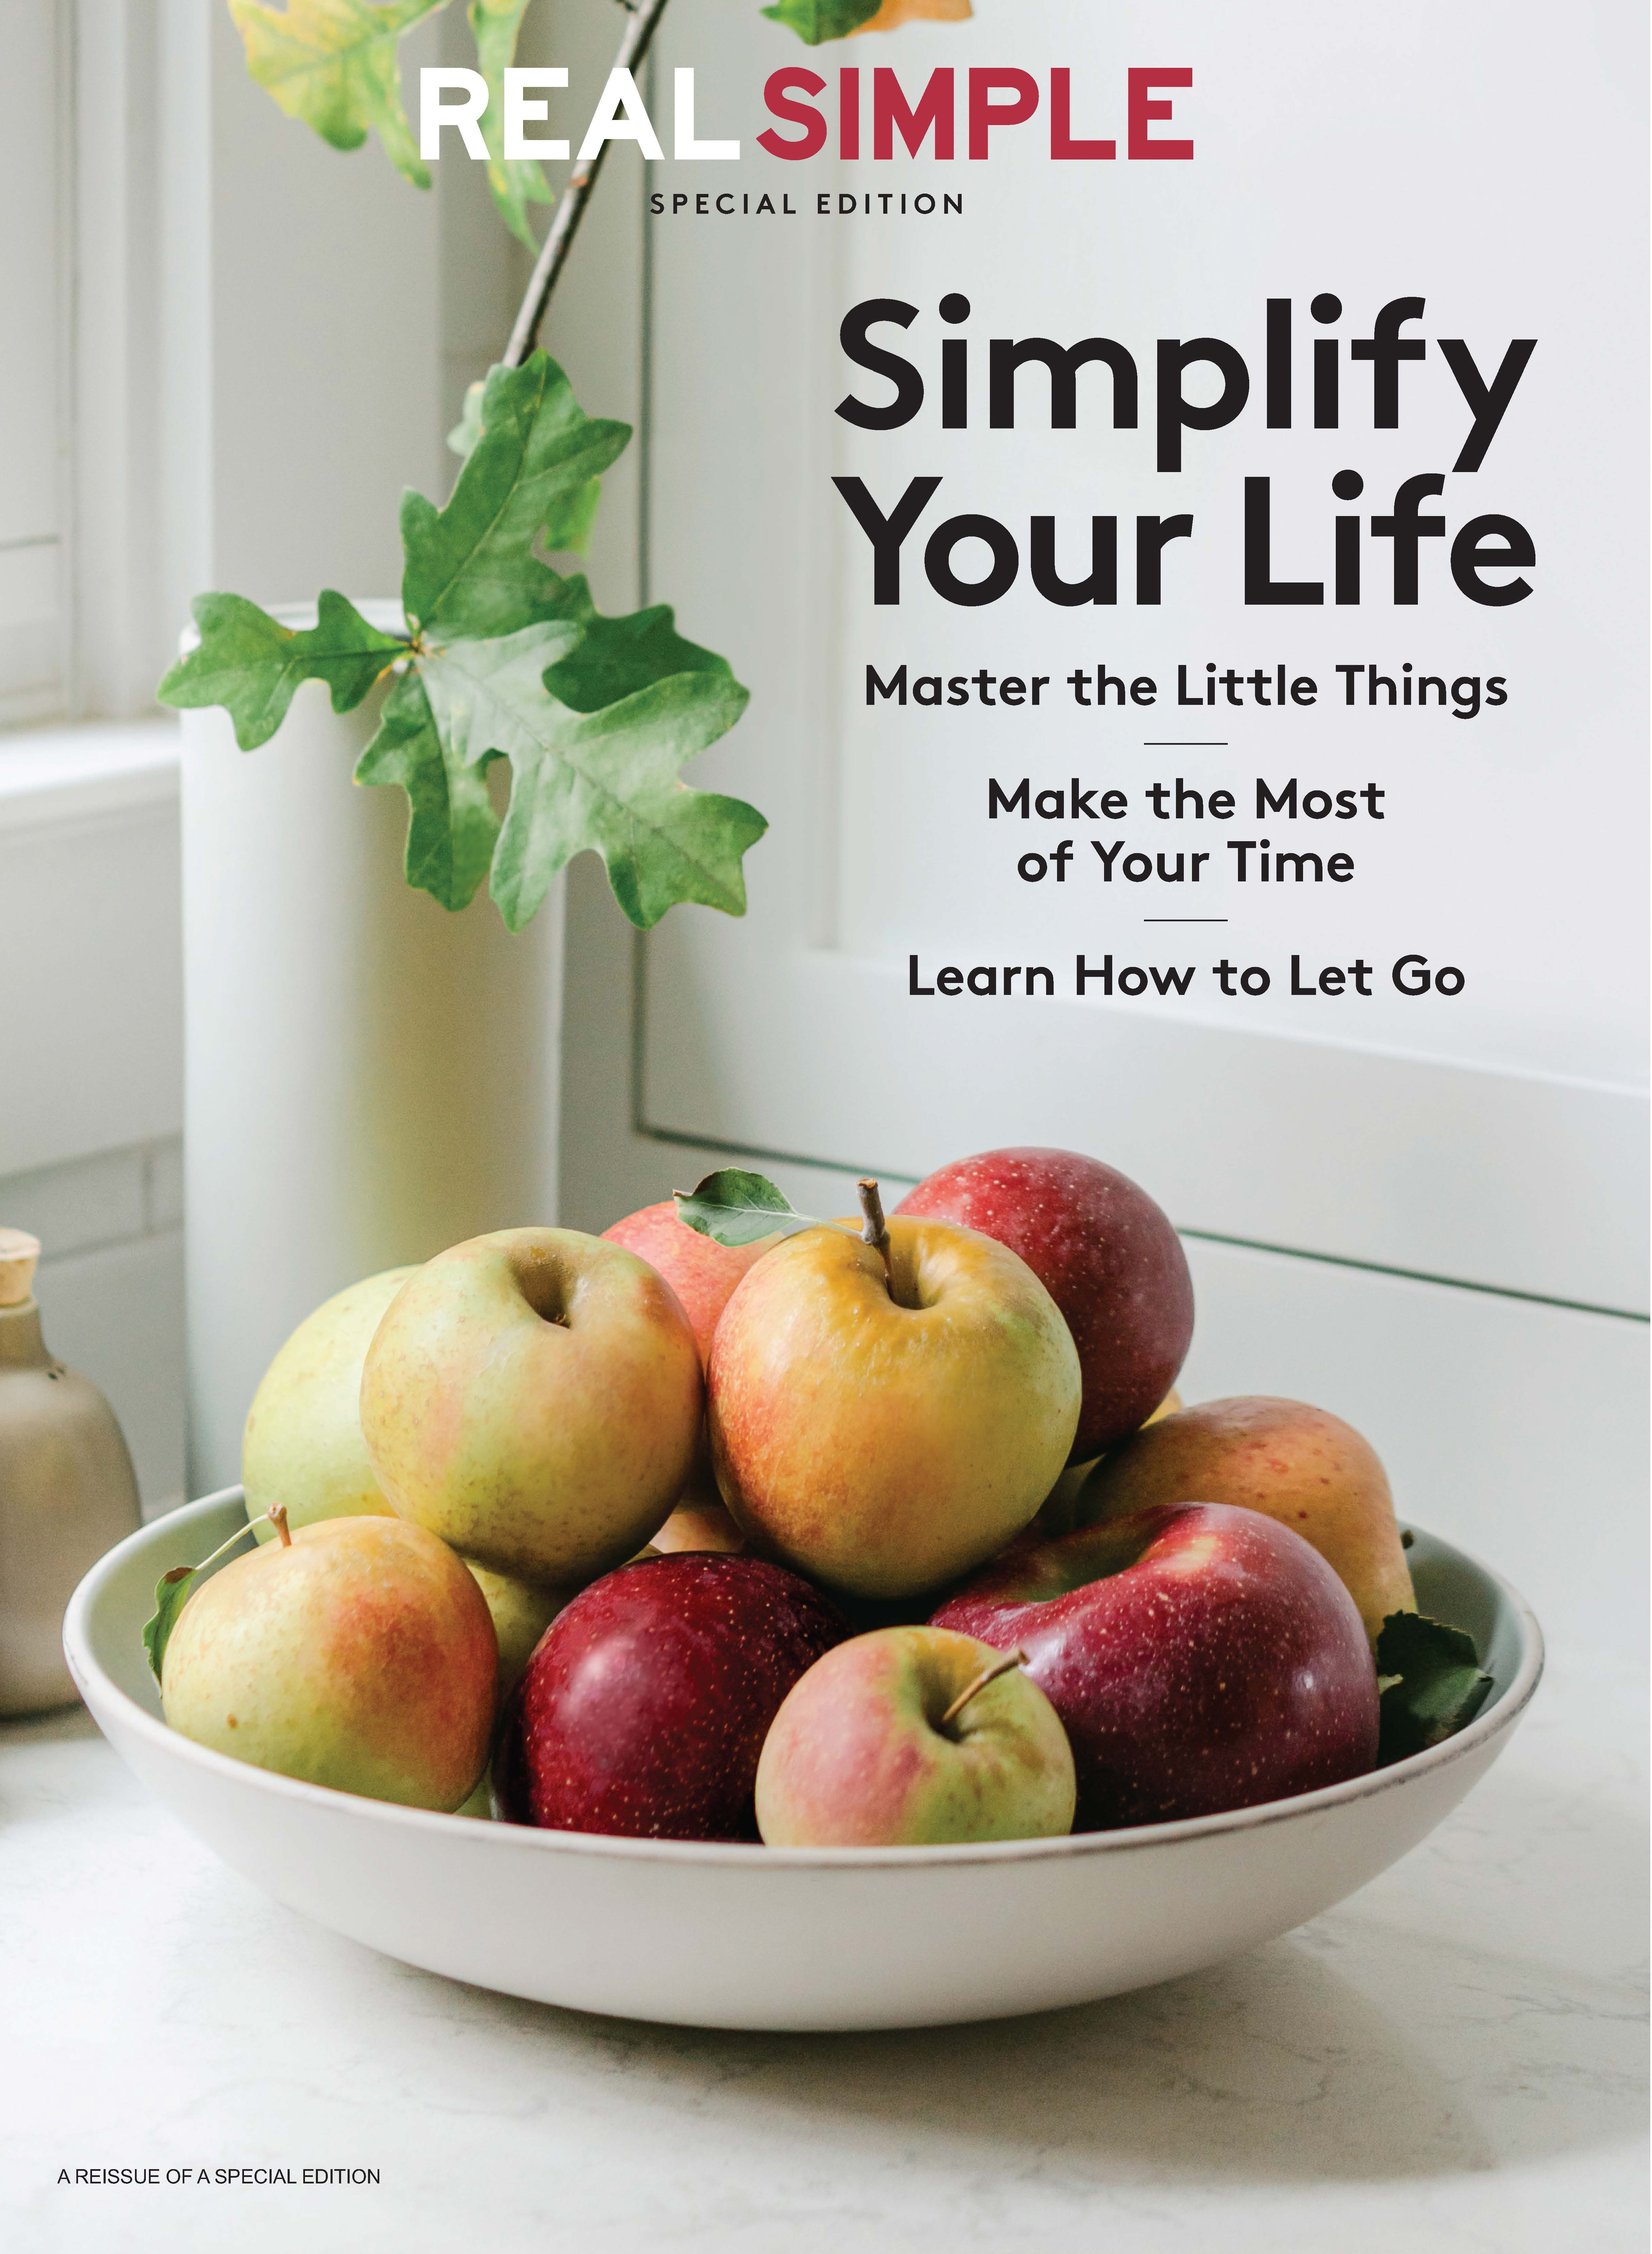 Latest issue of Real Simple: Simplify Your Life